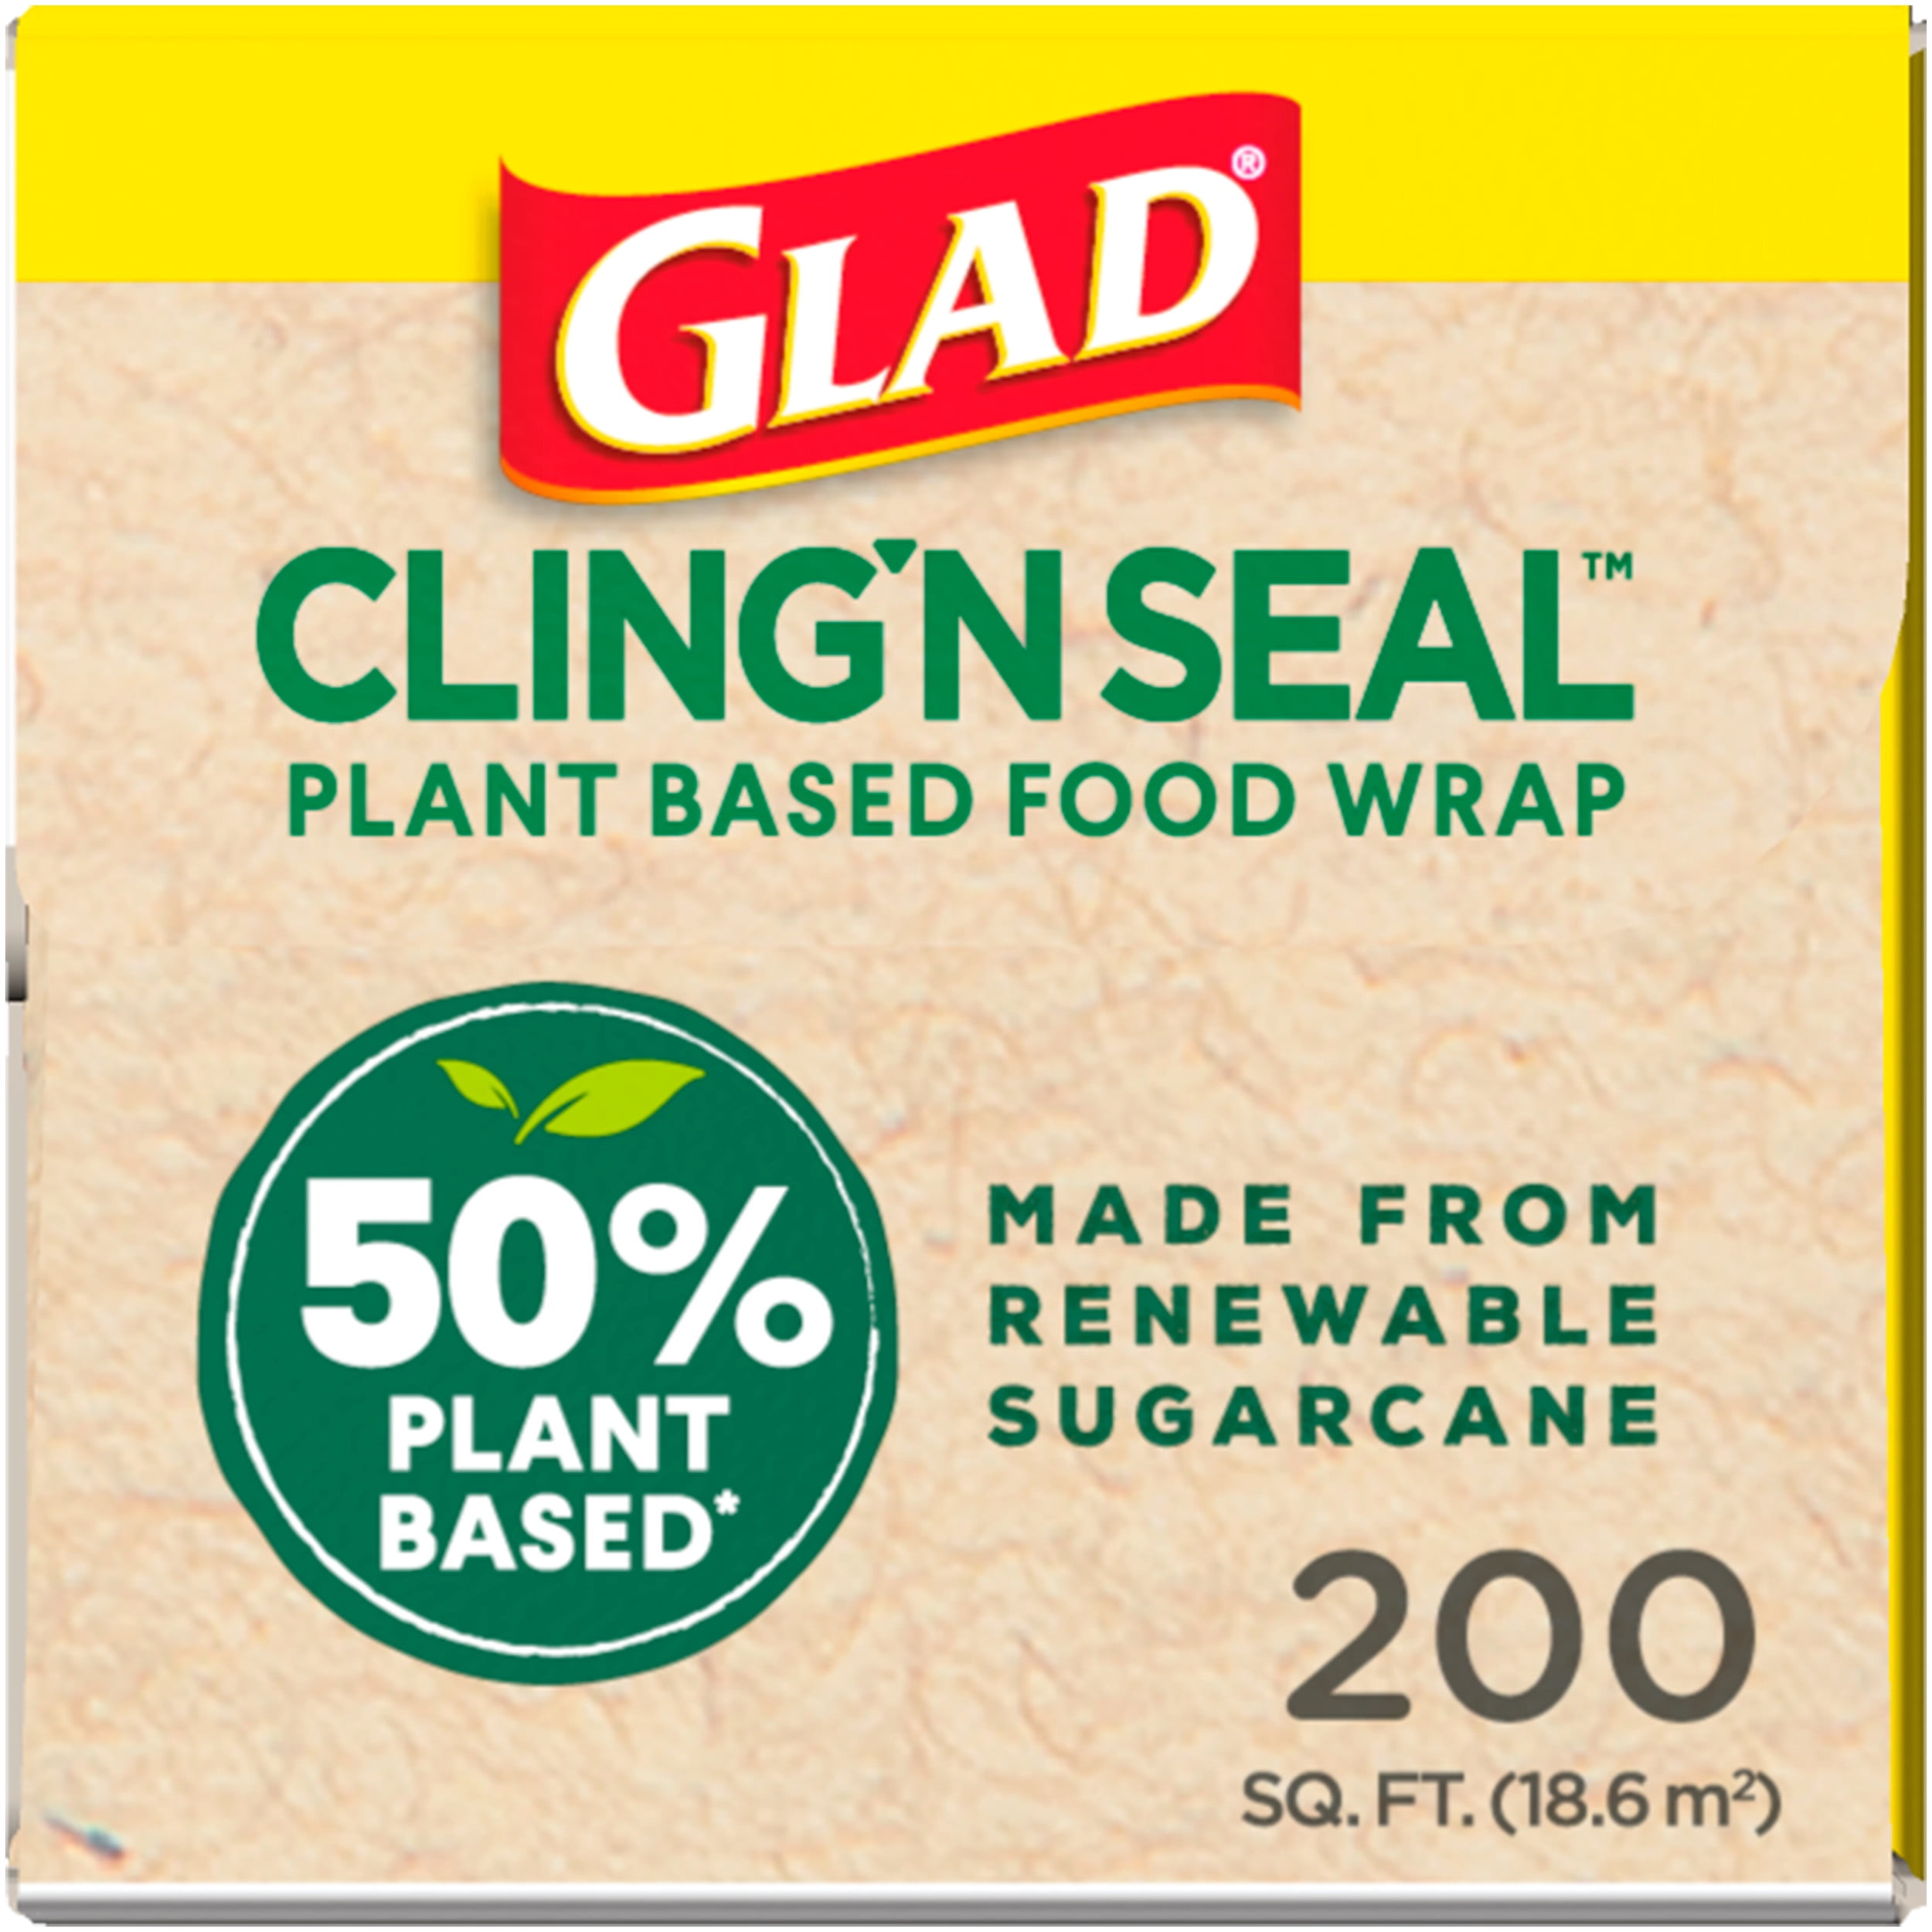 2-GLAD Cling Wrap Winter Edition Green Tinted Food Plastic Wrap